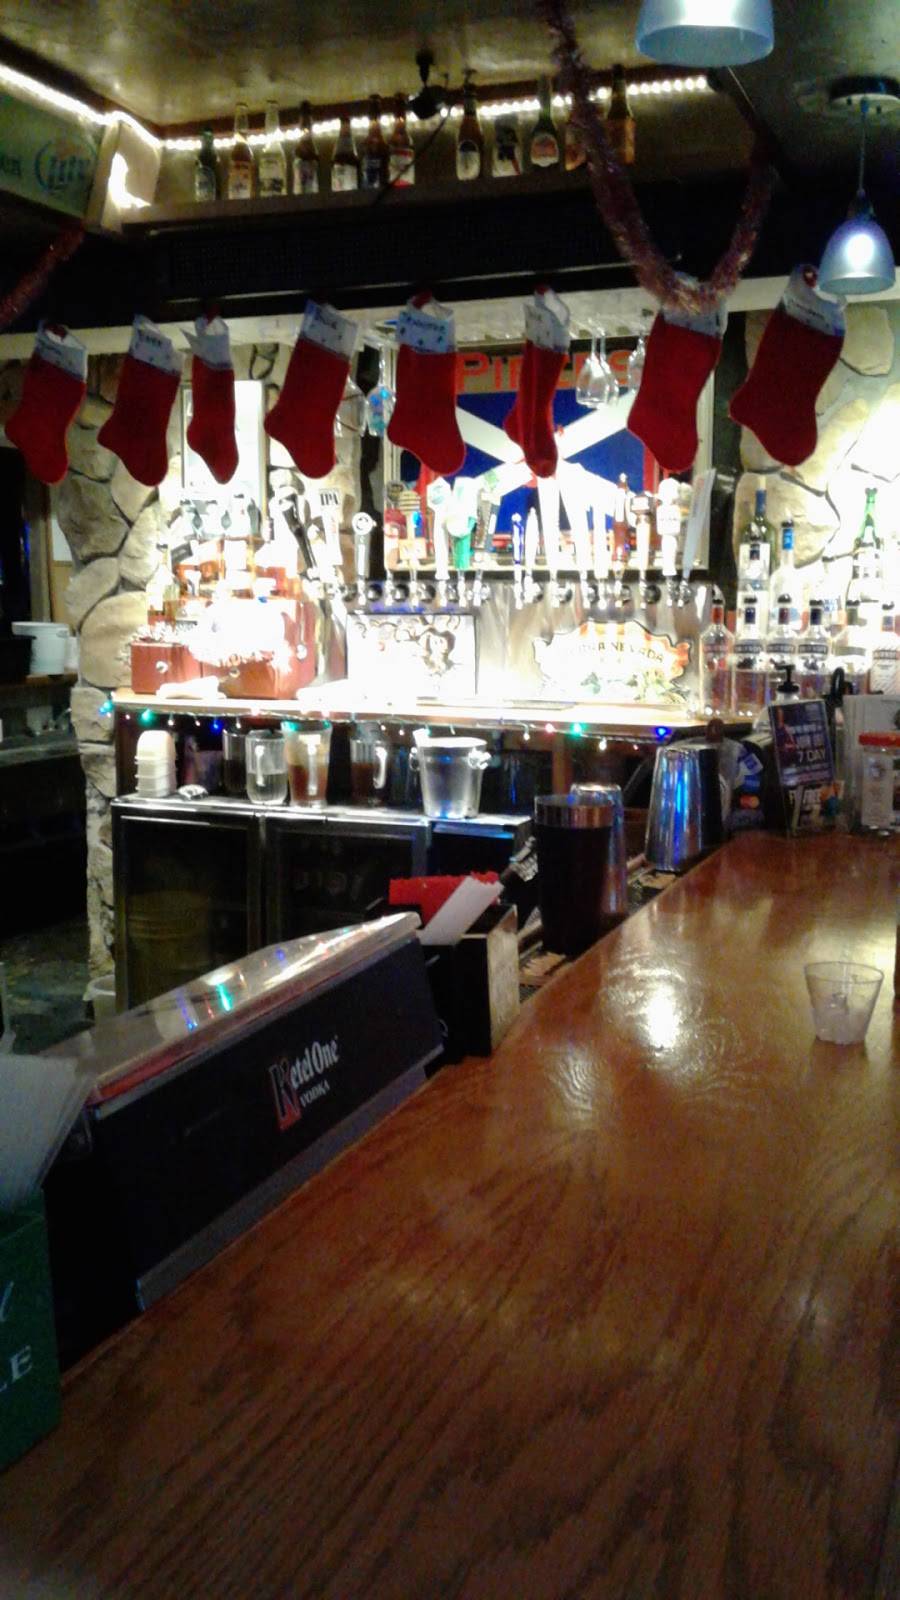 Pipers Sports Bar and Grill | 4544 Curry Ford Rd, Orlando, FL 32812, USA | Phone: (407) 277-2883